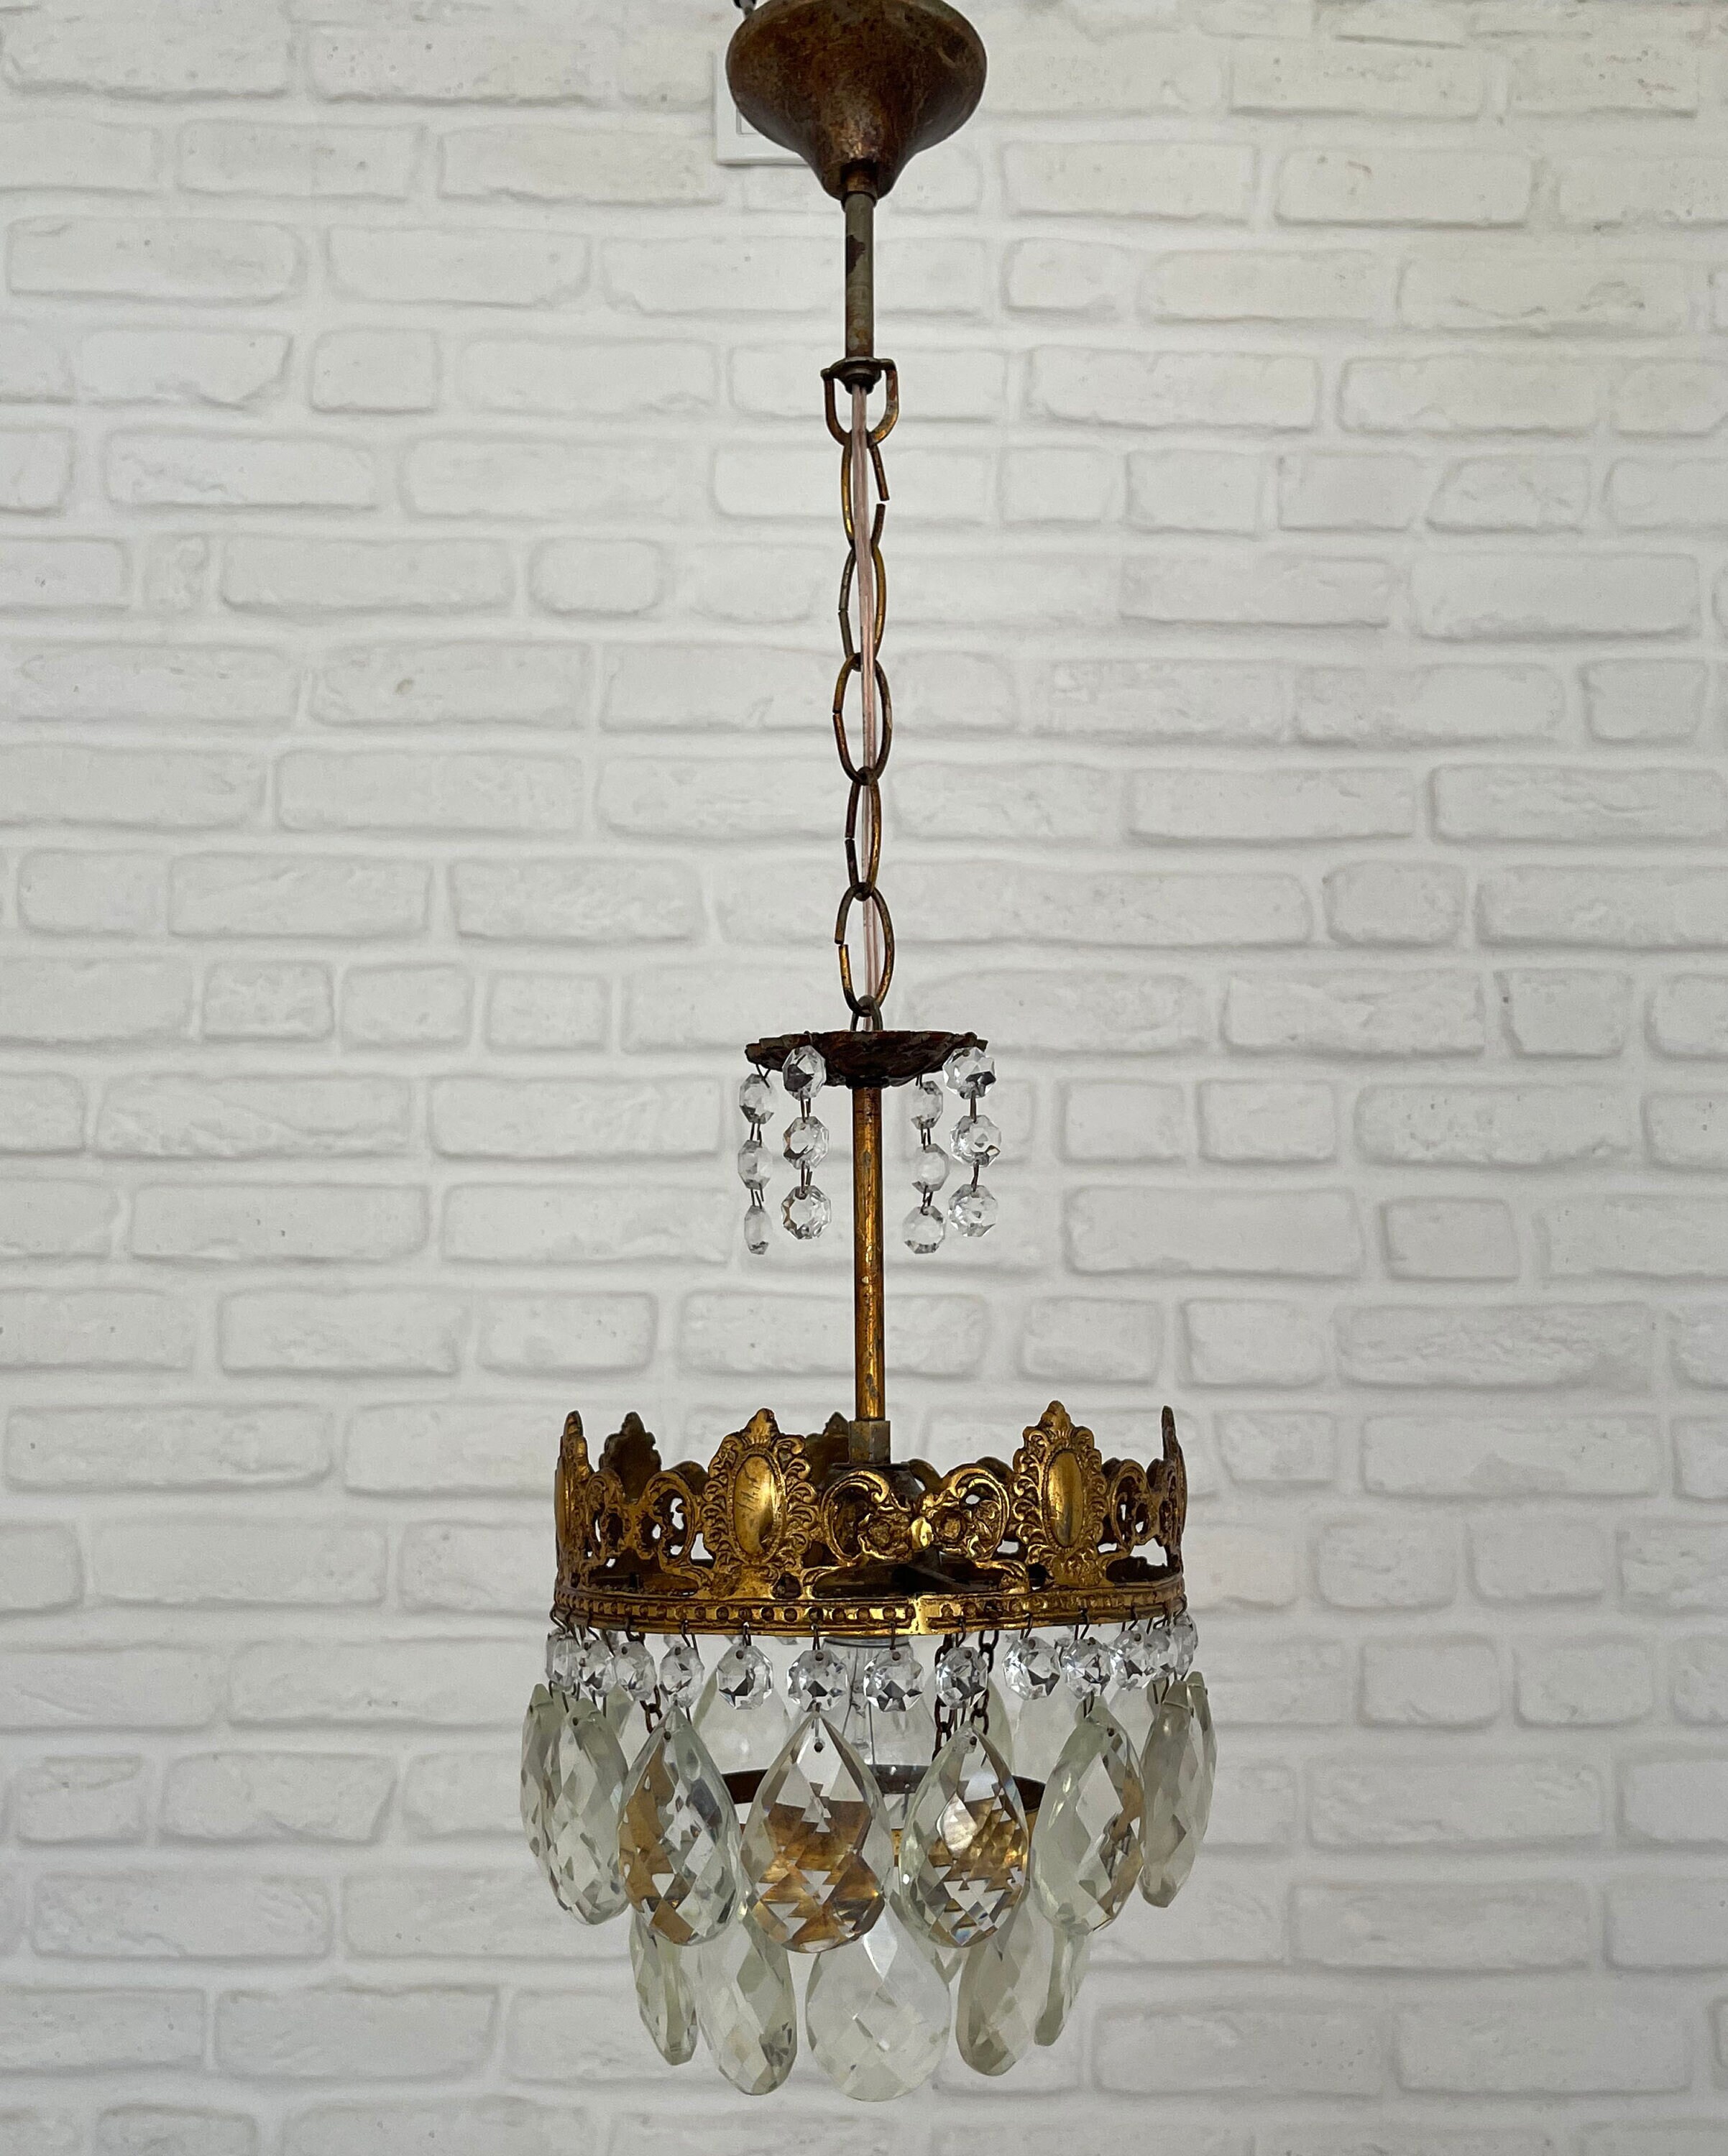 Antique / Vintage Brass & Crystals Small Chandelier Ceiling Light Pendant  Lighting Glass Lamp from 1950's